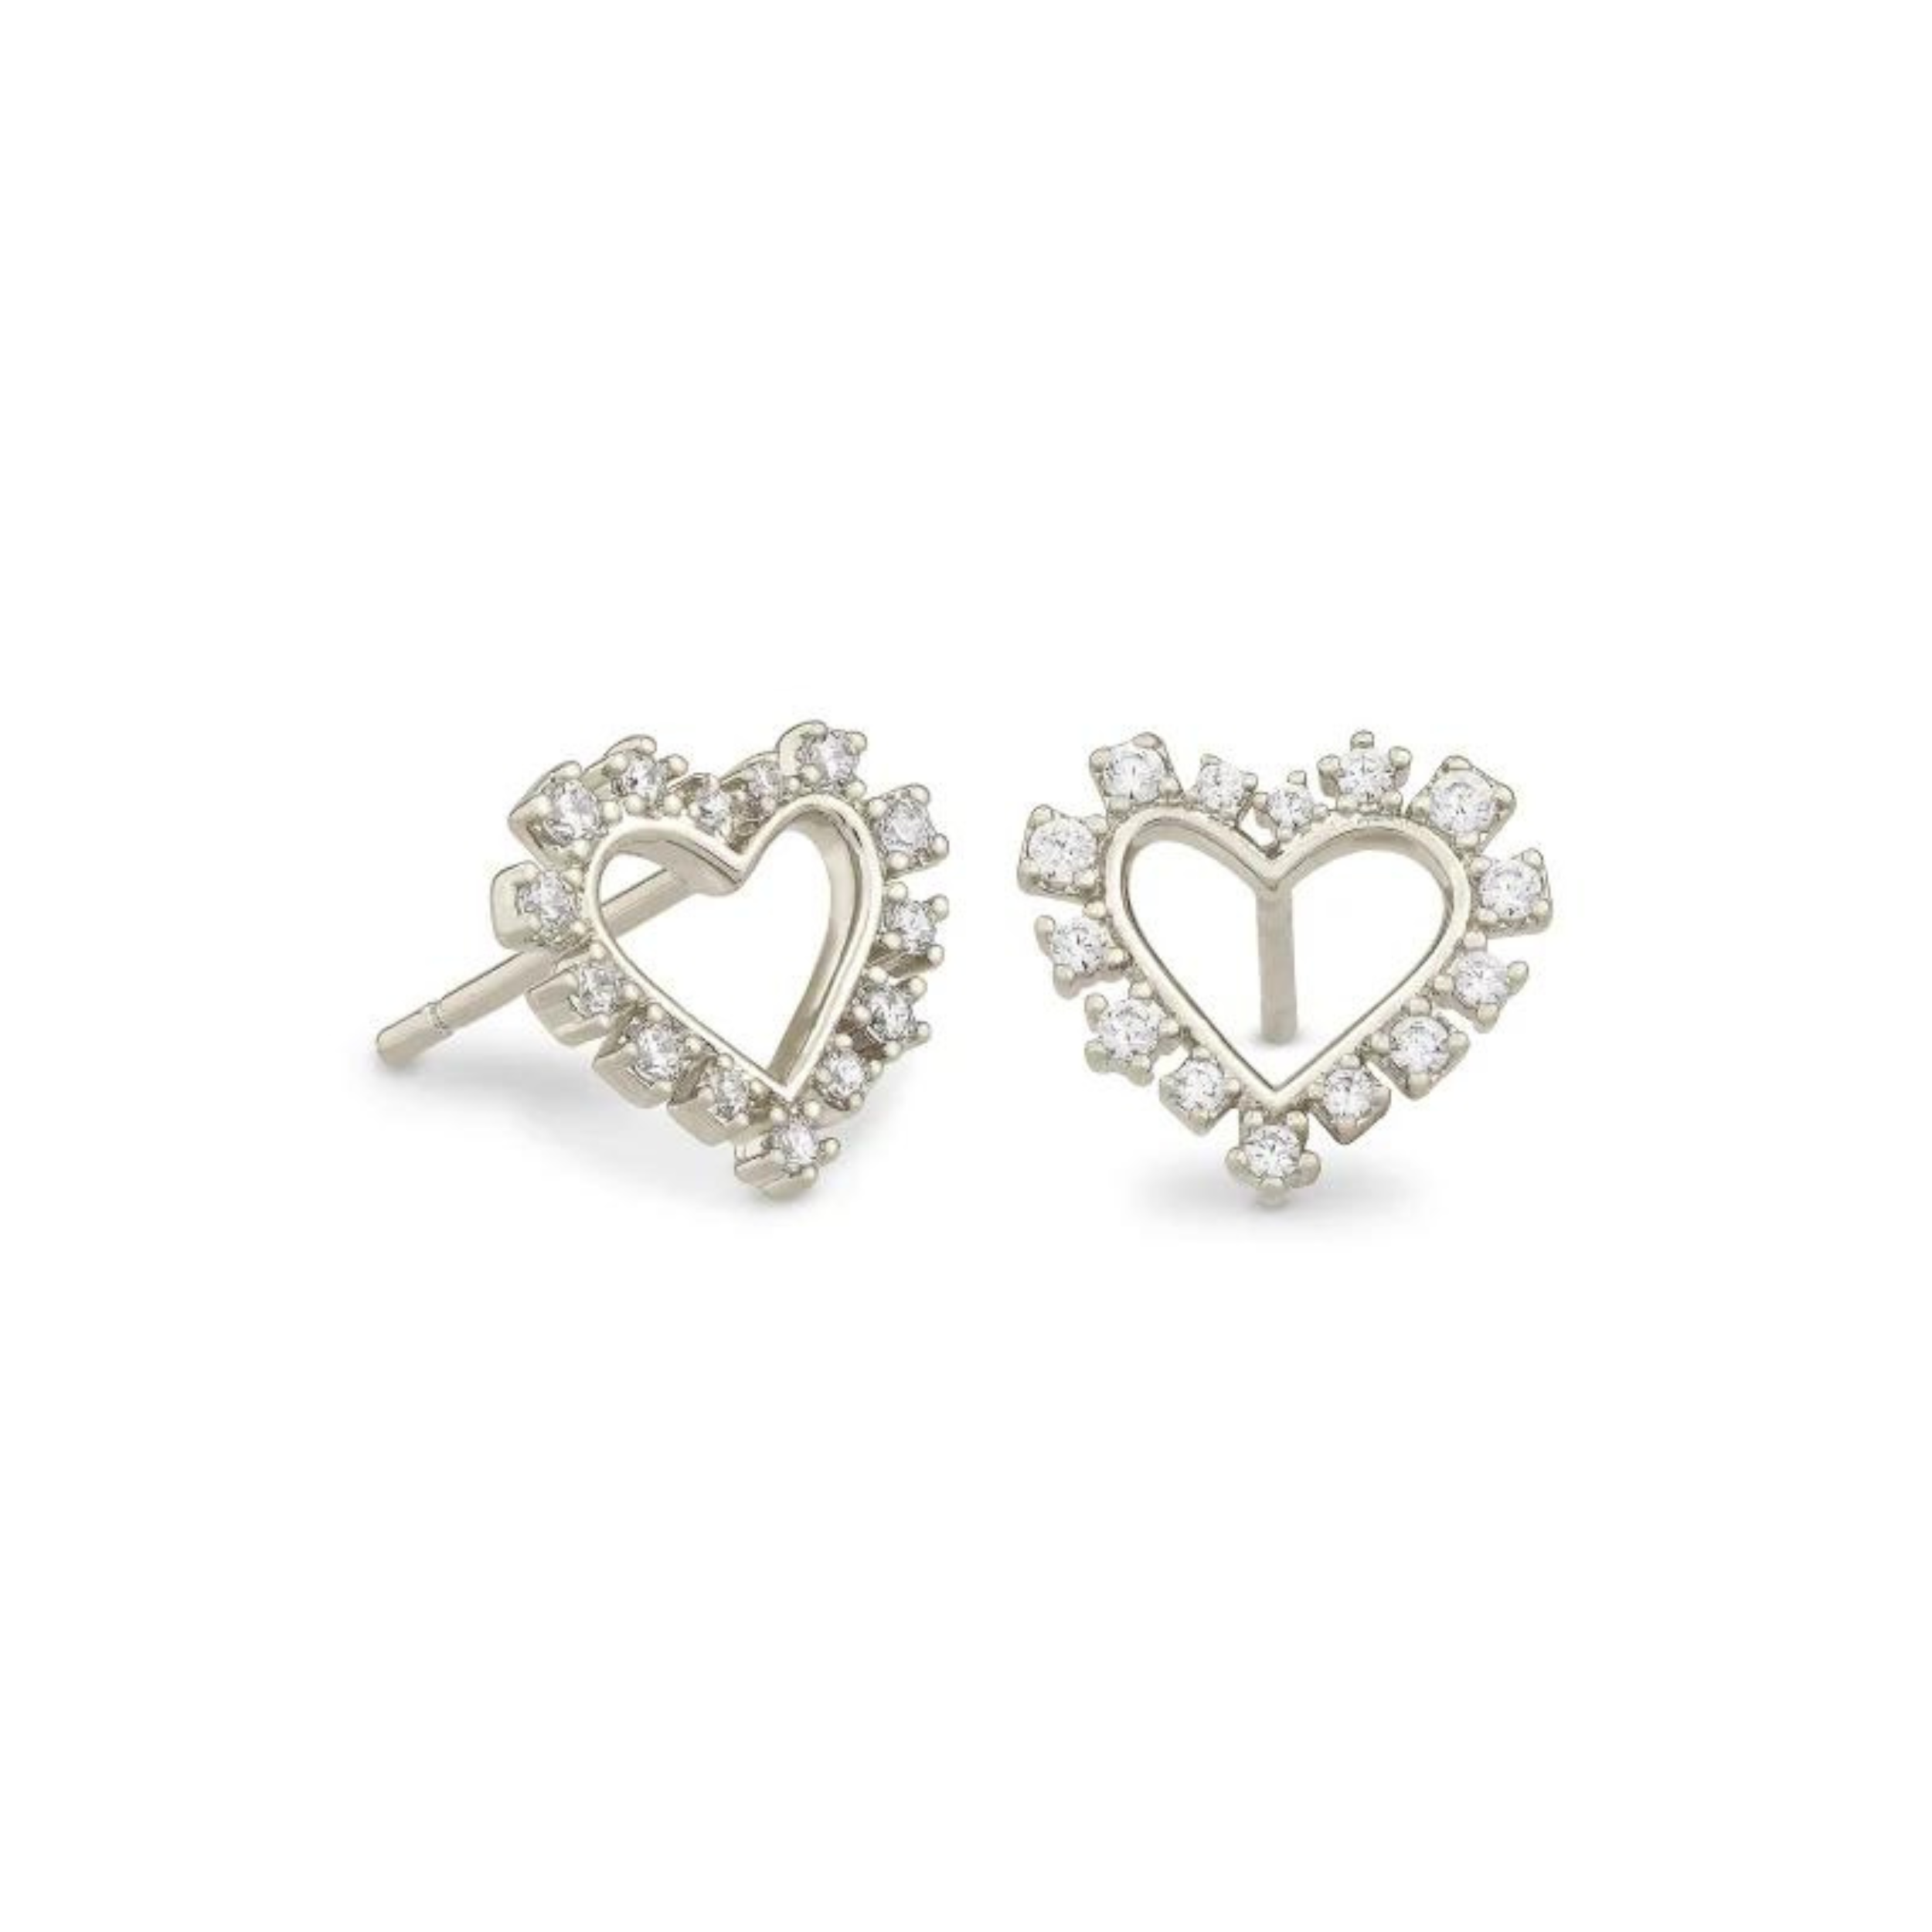 Kendra Scott | Ari Heart Silver Stud Earrings in White Crystal - Giddy Up Glamour Boutique